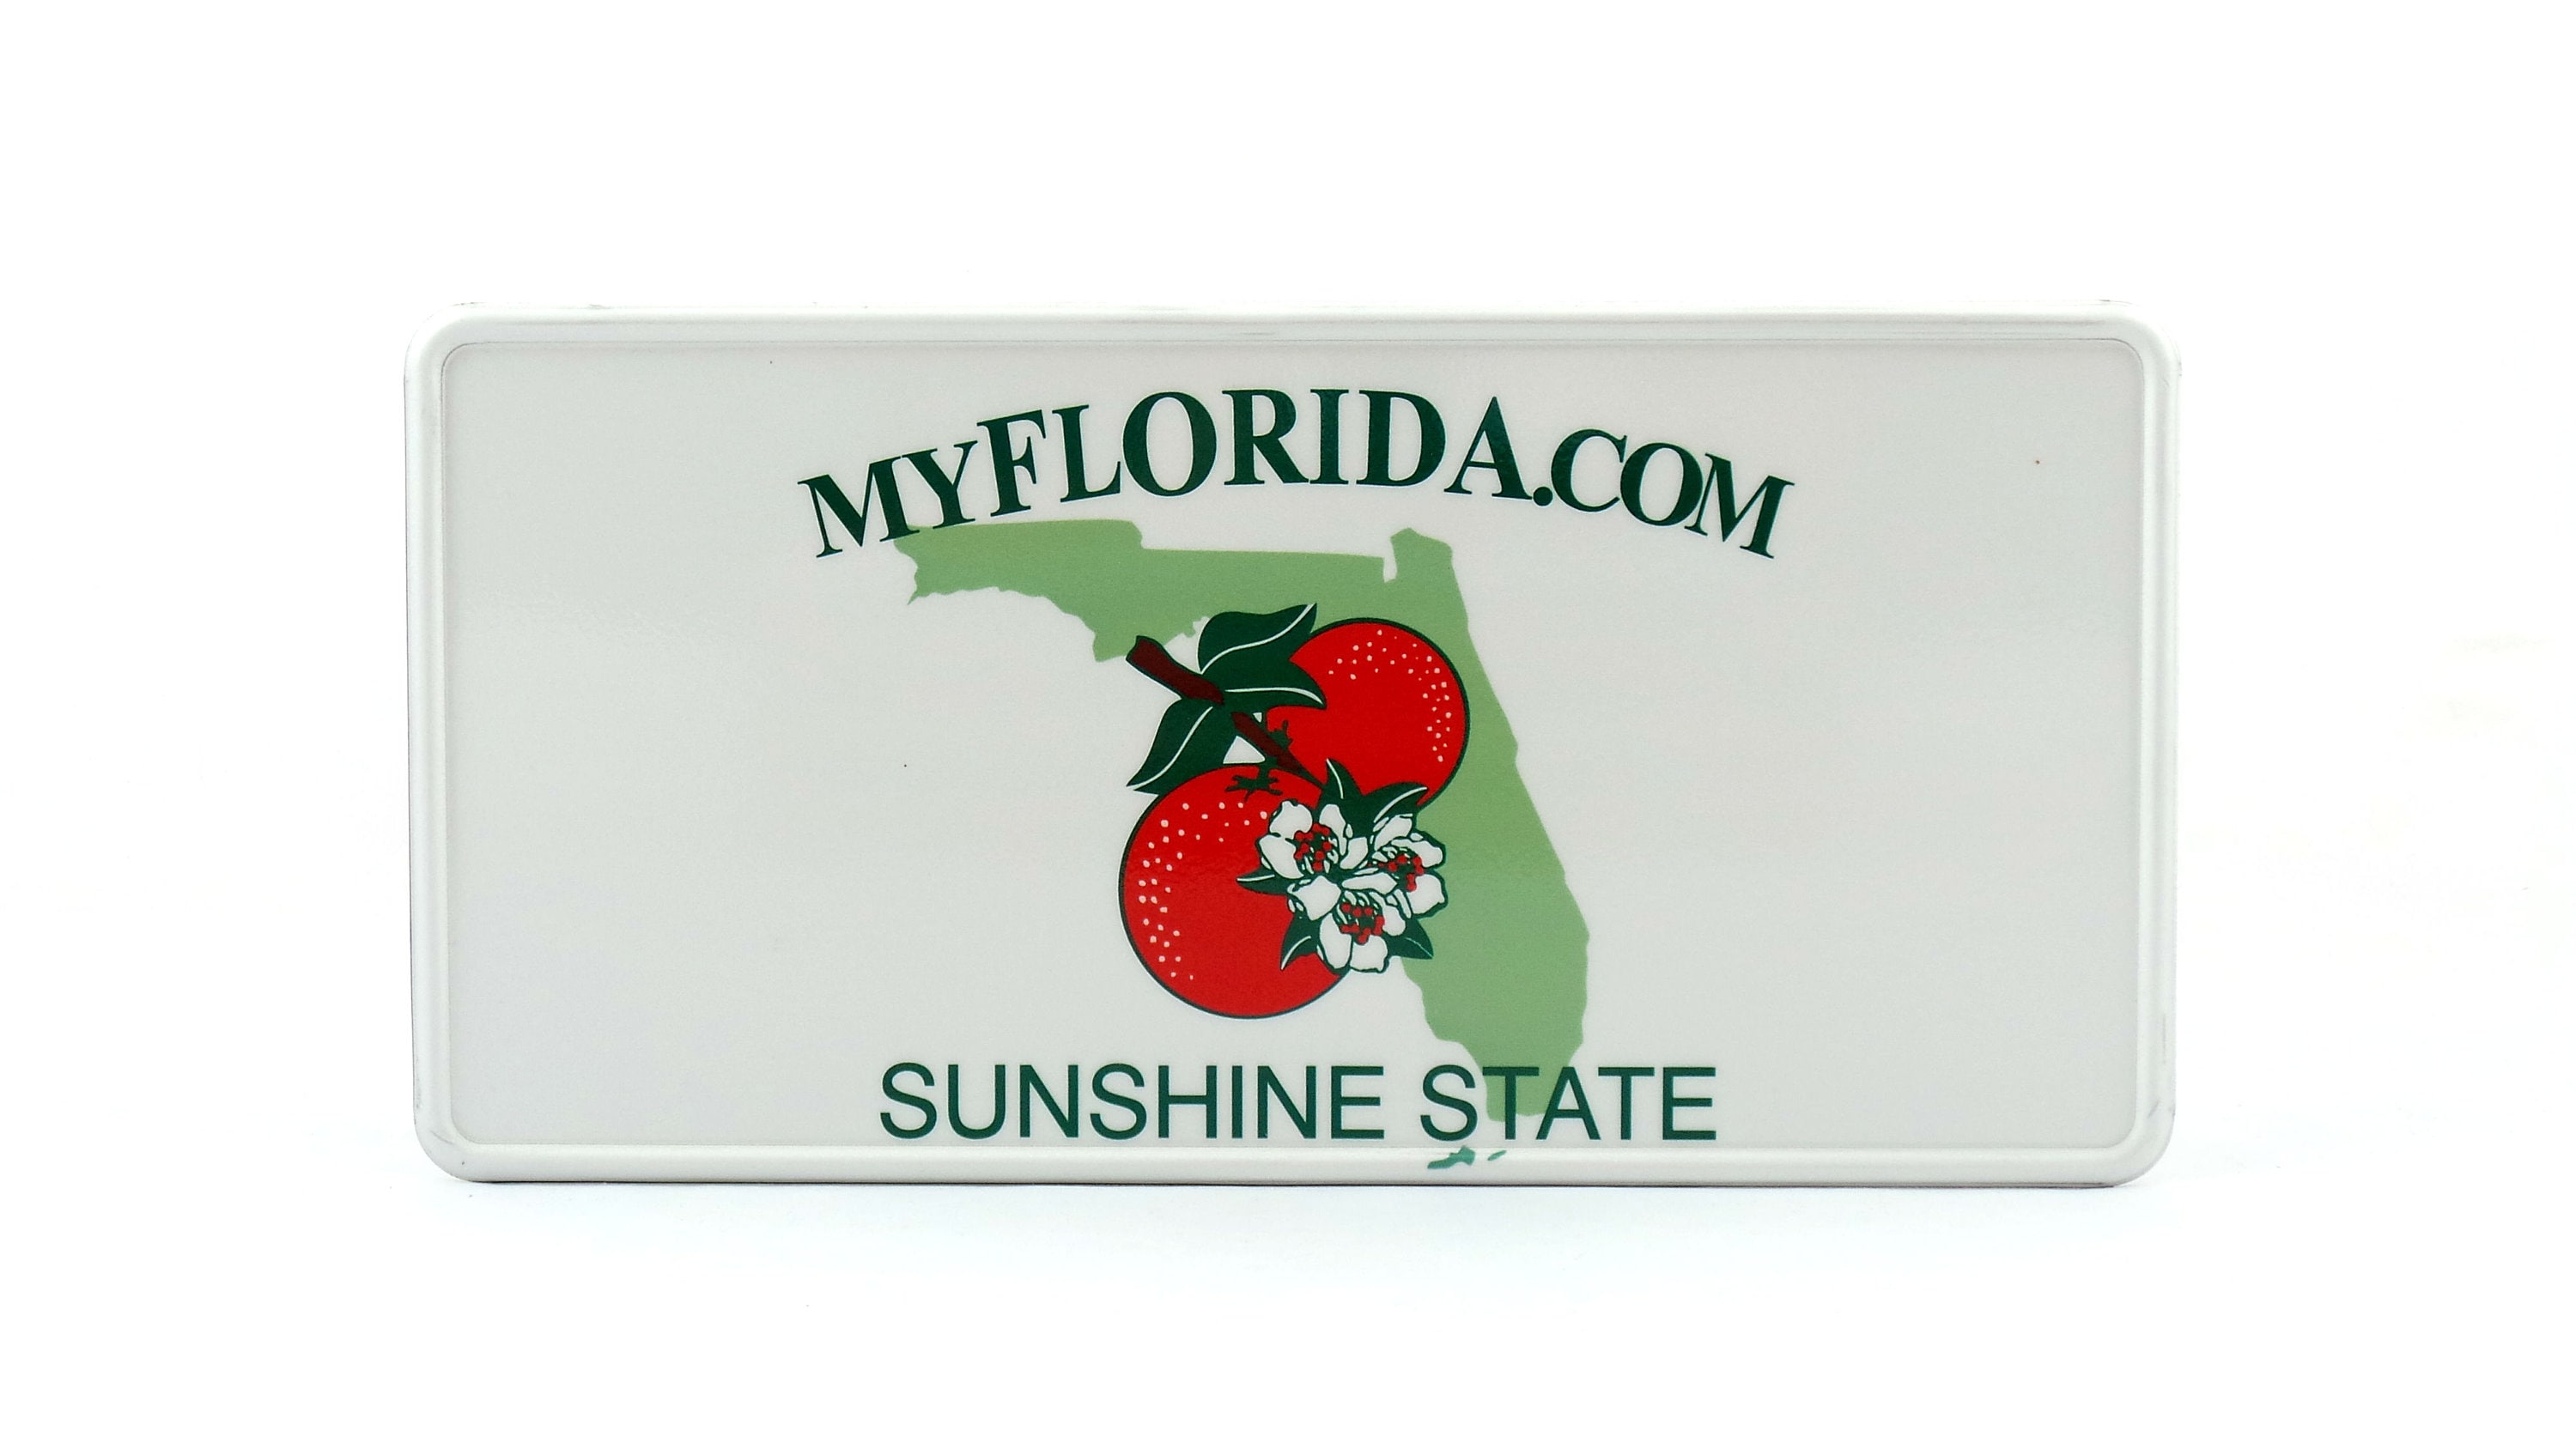 Florida License Plate Clipart